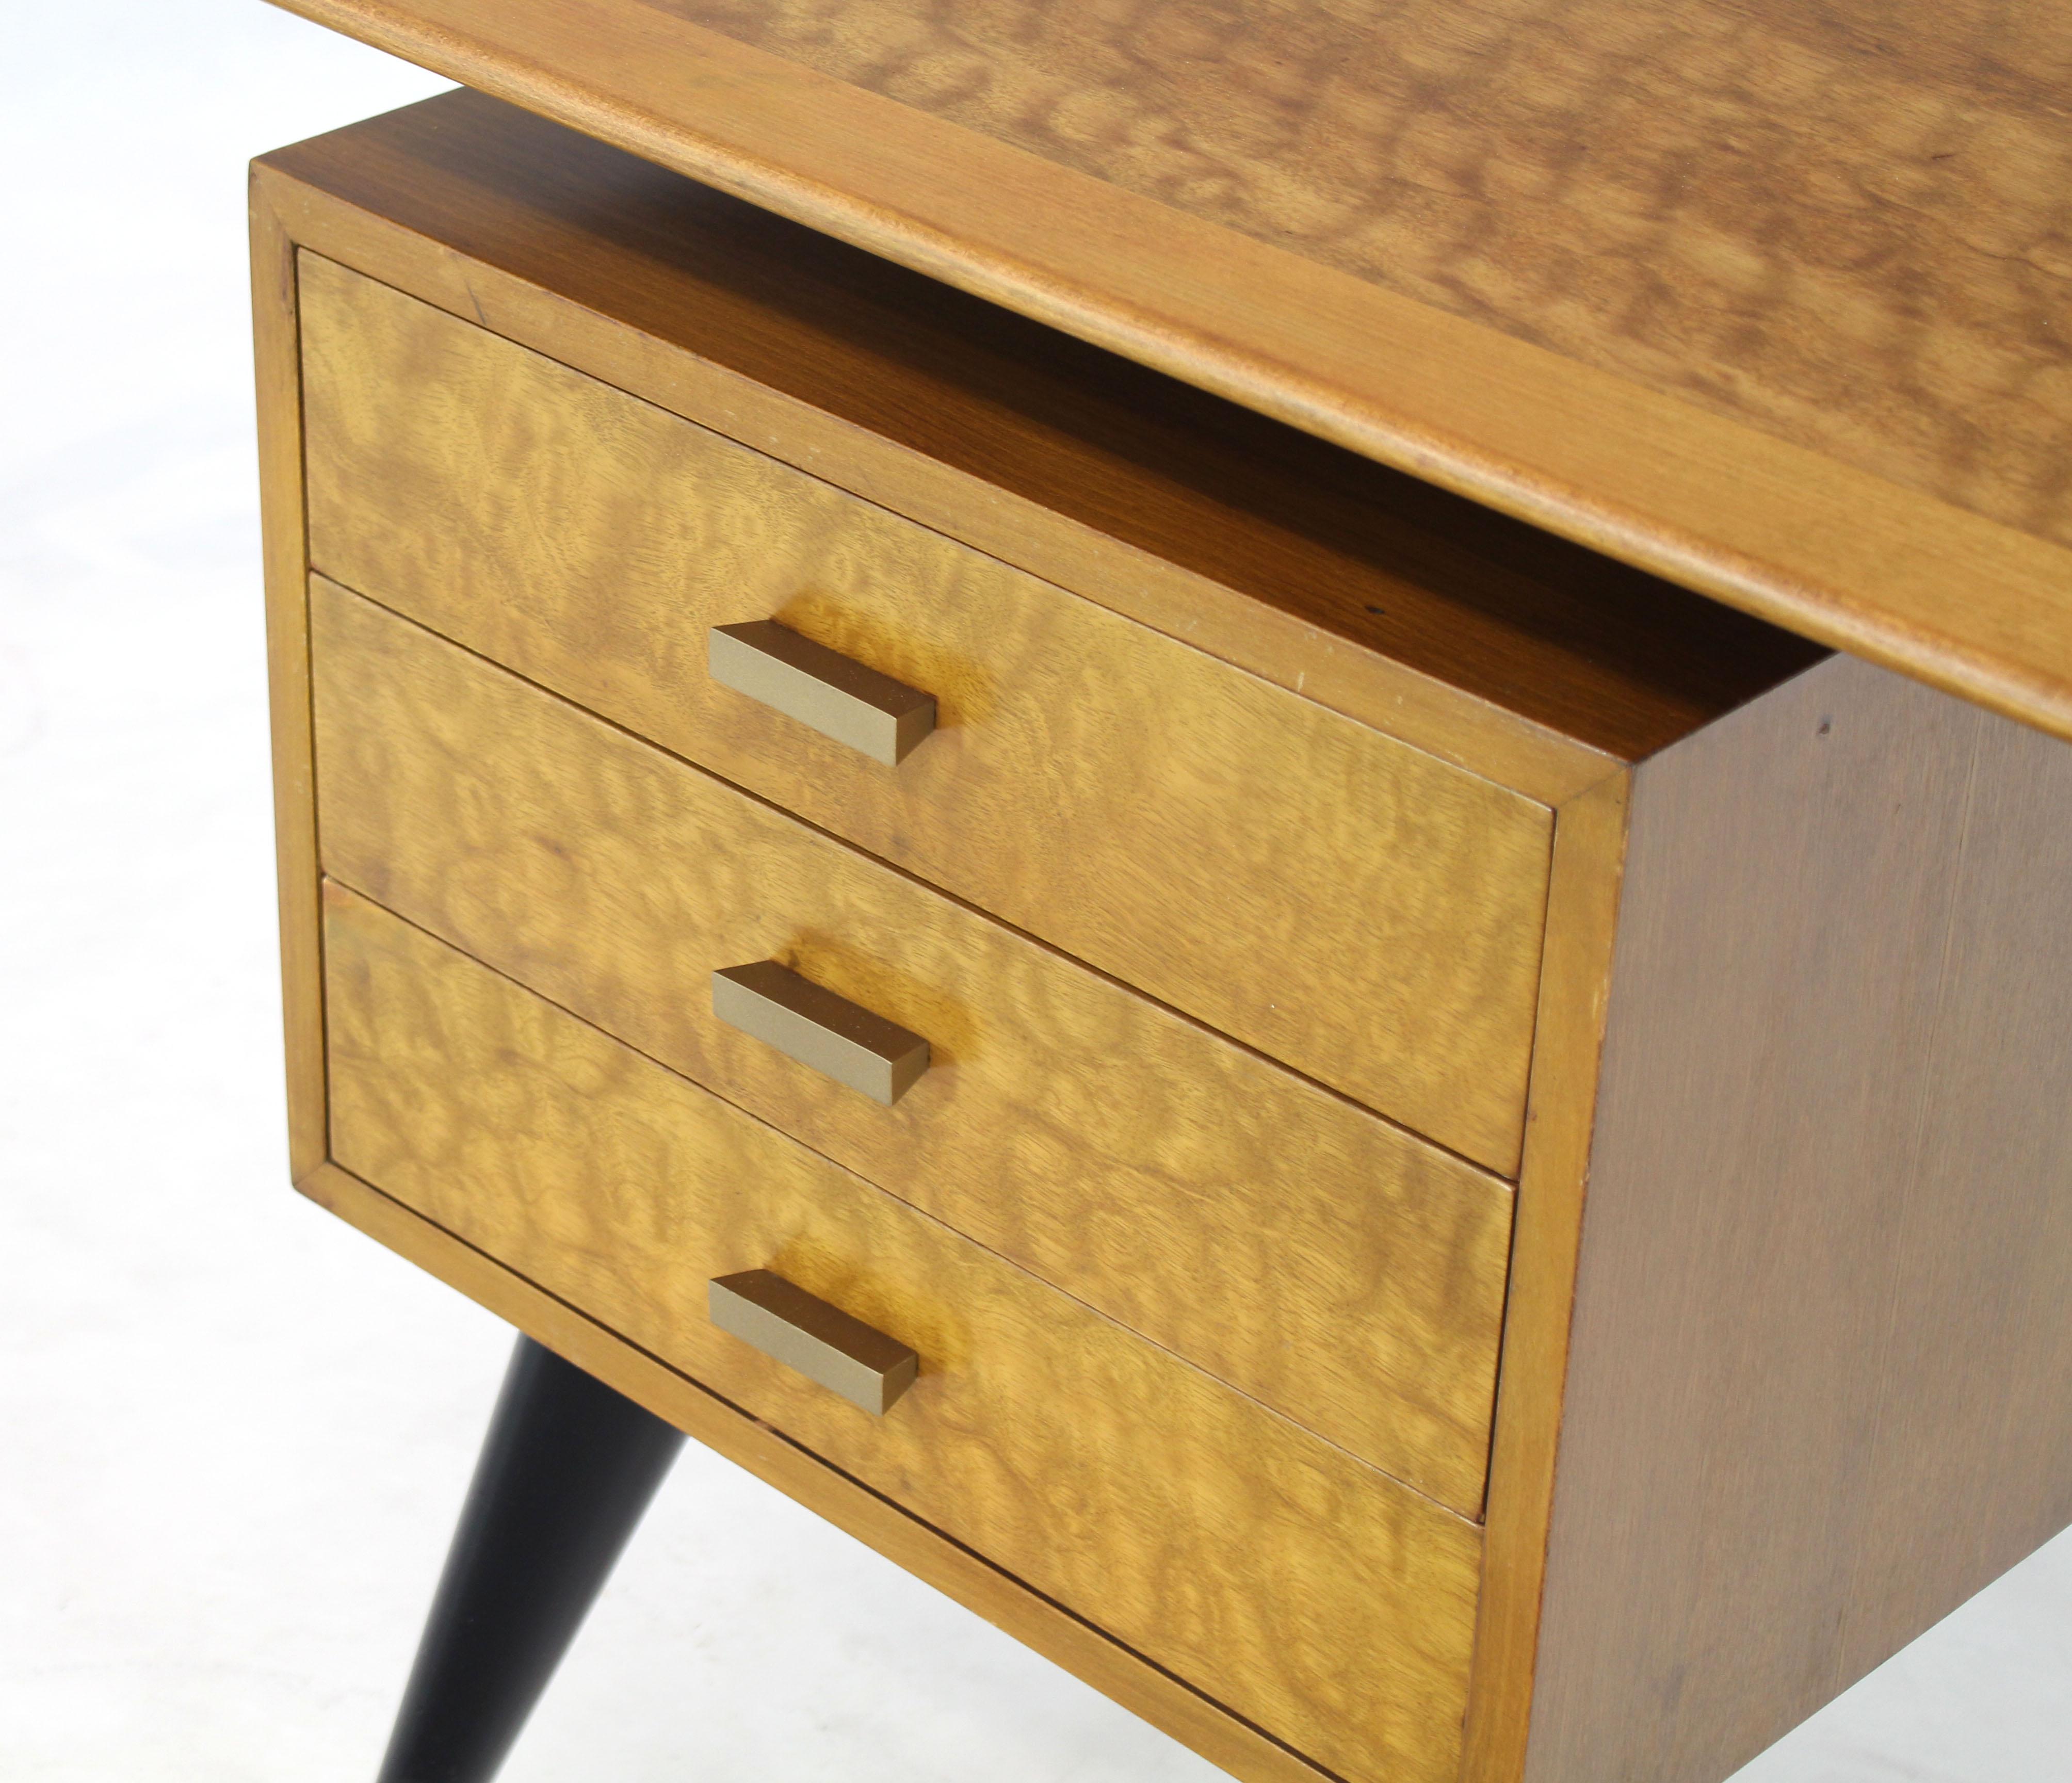 Lacquered Italian Birch Tiger Maple Exposed Sculptural Legs One Pedestal 4 Drawers Desk